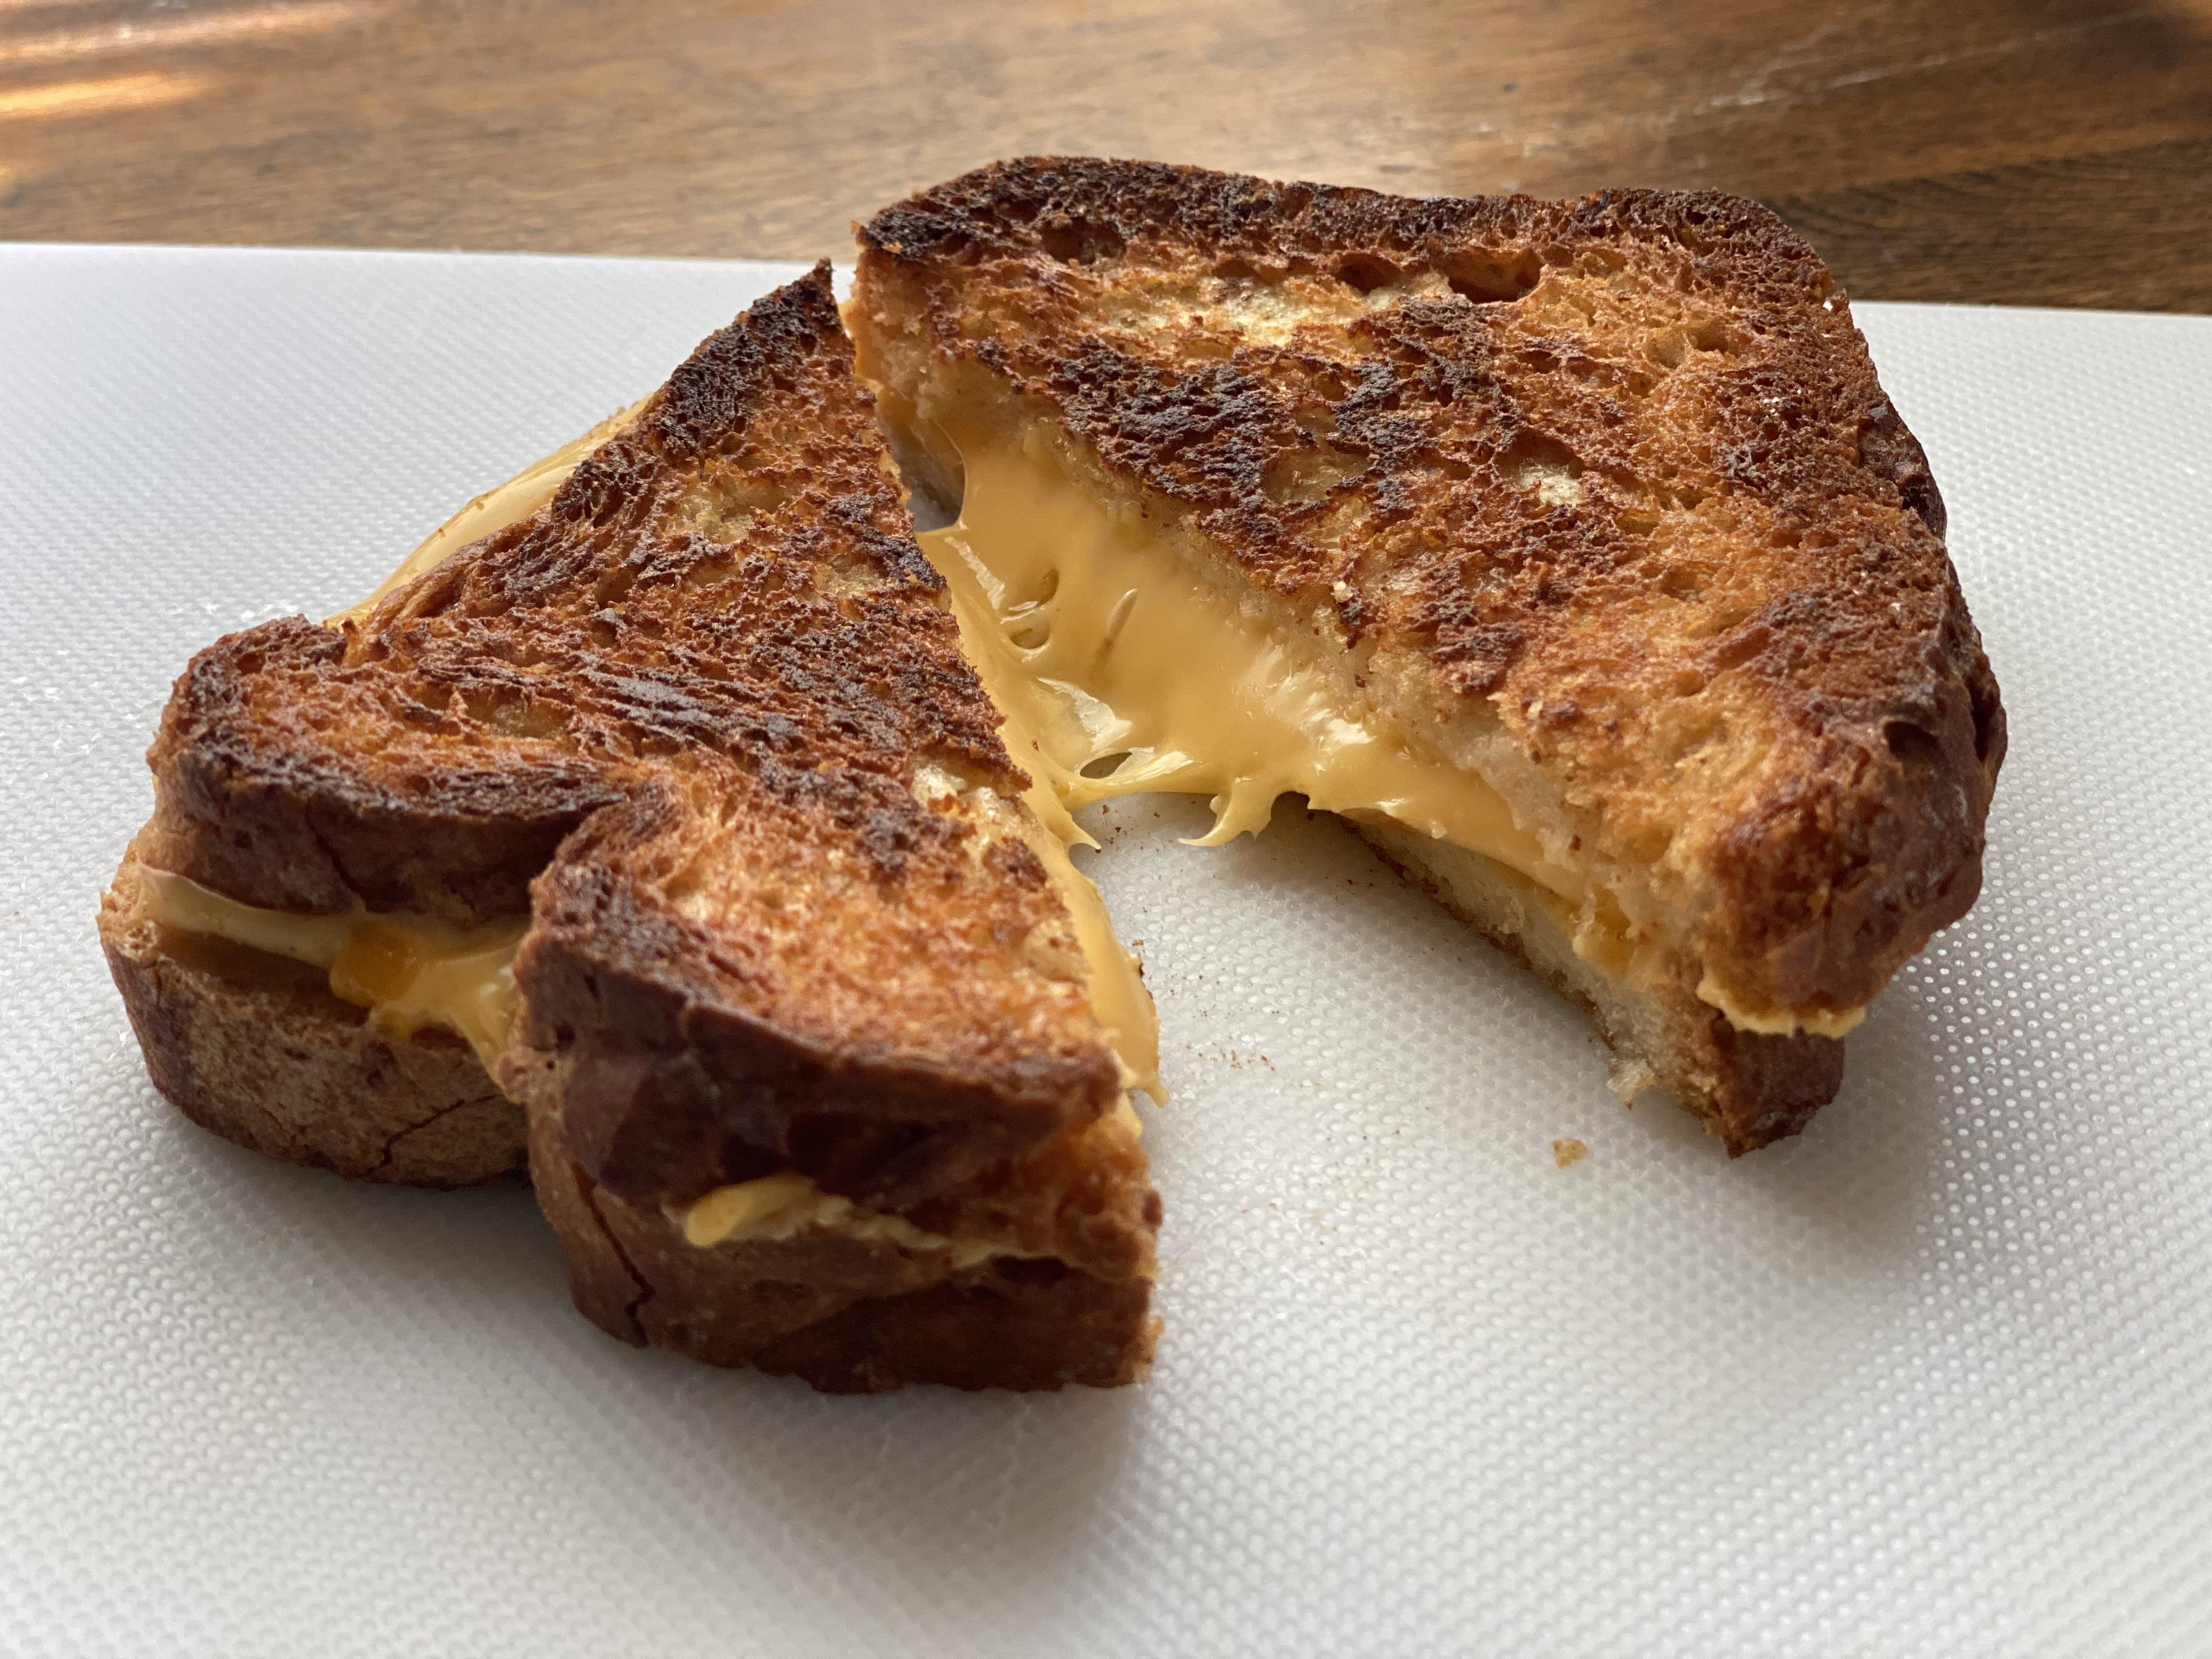 Grilled cheese sandwich cut in half with melted cheese on a plate